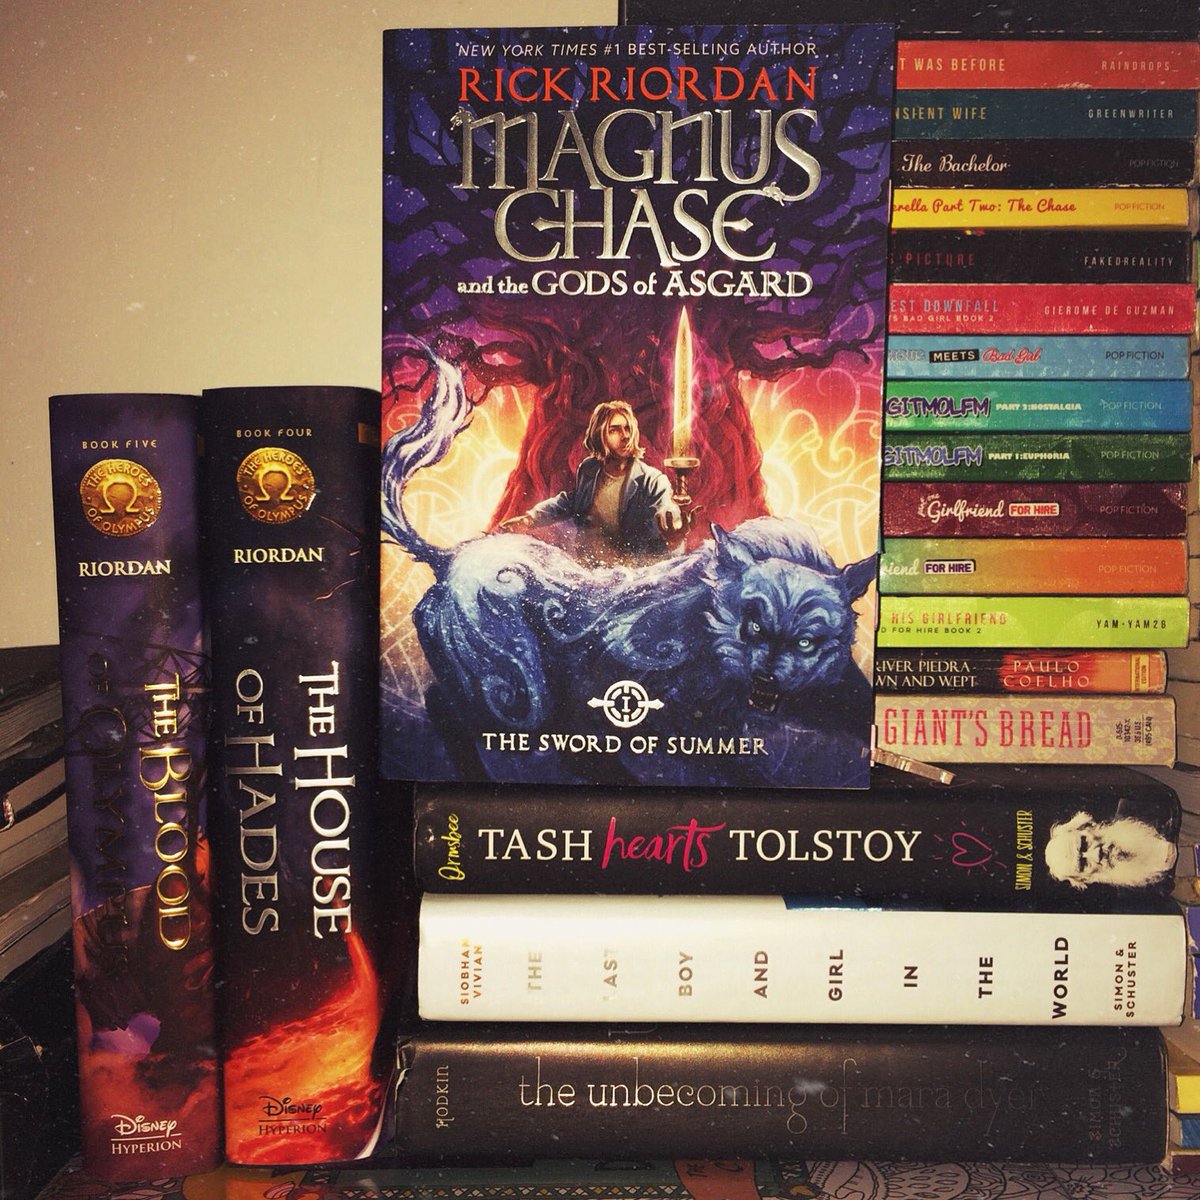 “I’d learned the hard way: you never walk into a situation until you understand what’s going on.” 
• magnus chase

Currently reading : Magnus chase and the Gods of asgard

#NBSbookstagram #NBSgiveaway